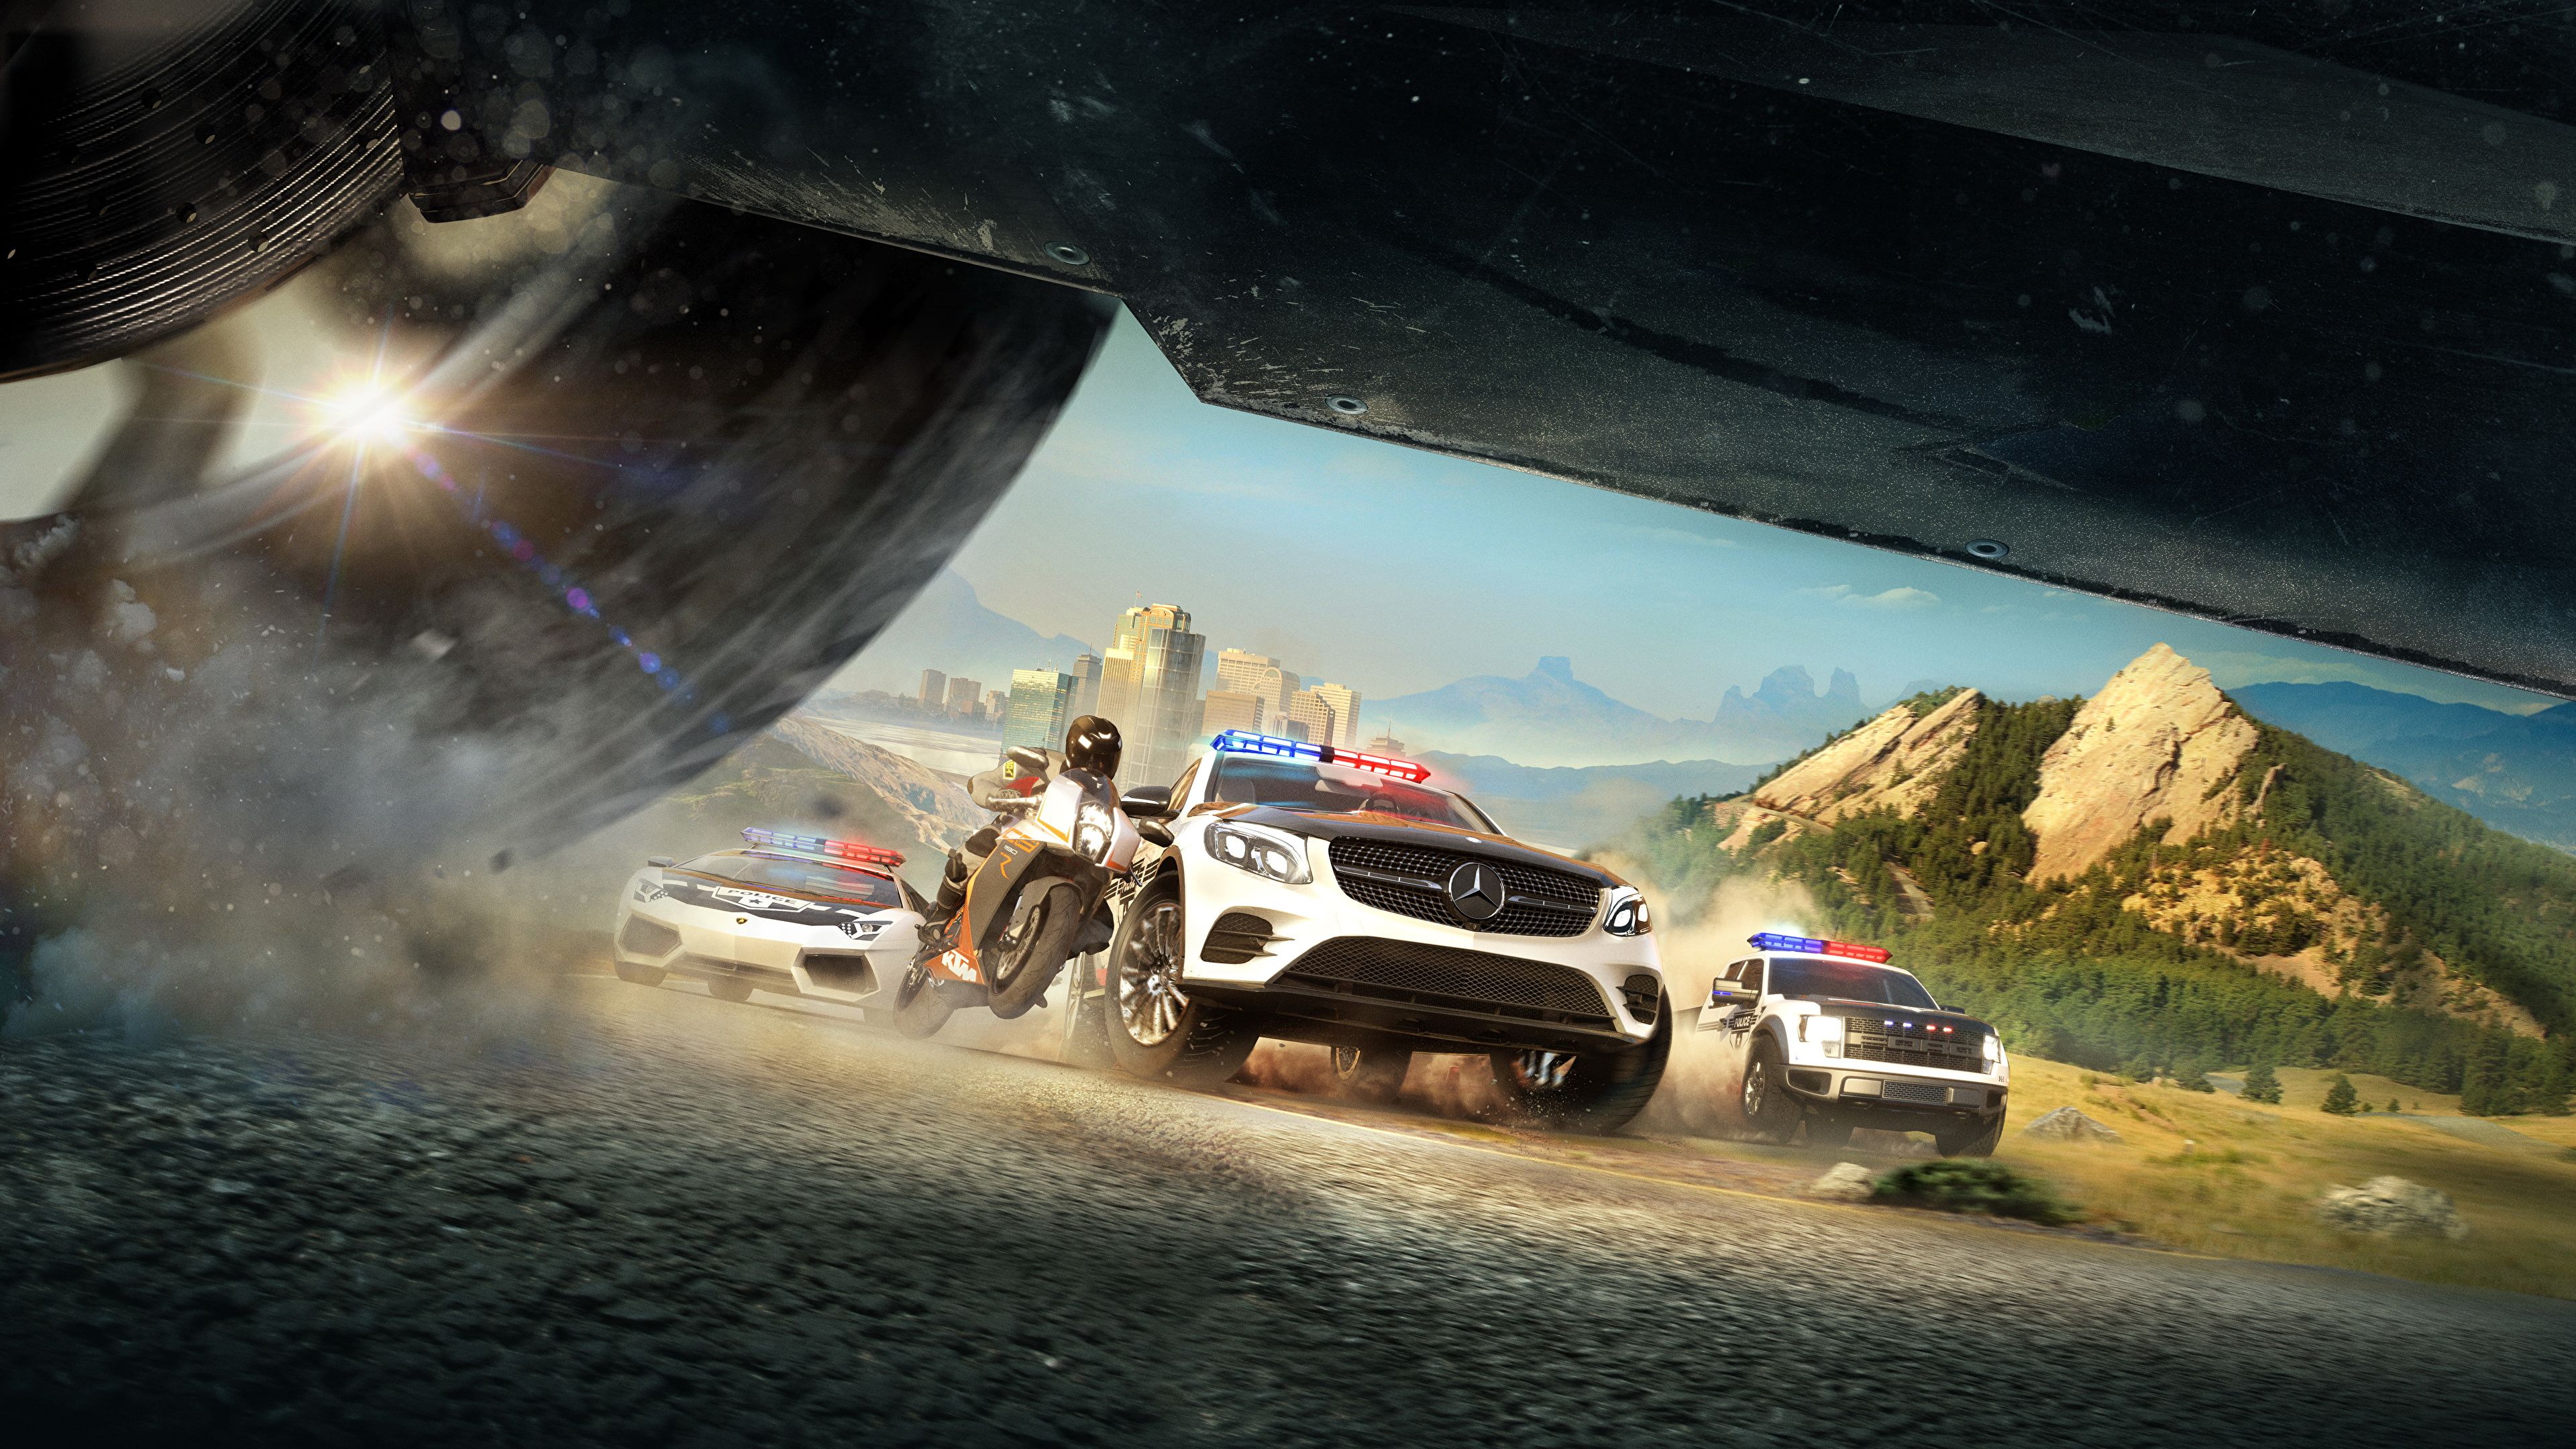 Picture The Crew Mercedes Benz Police Vdeo Game 3840x2160